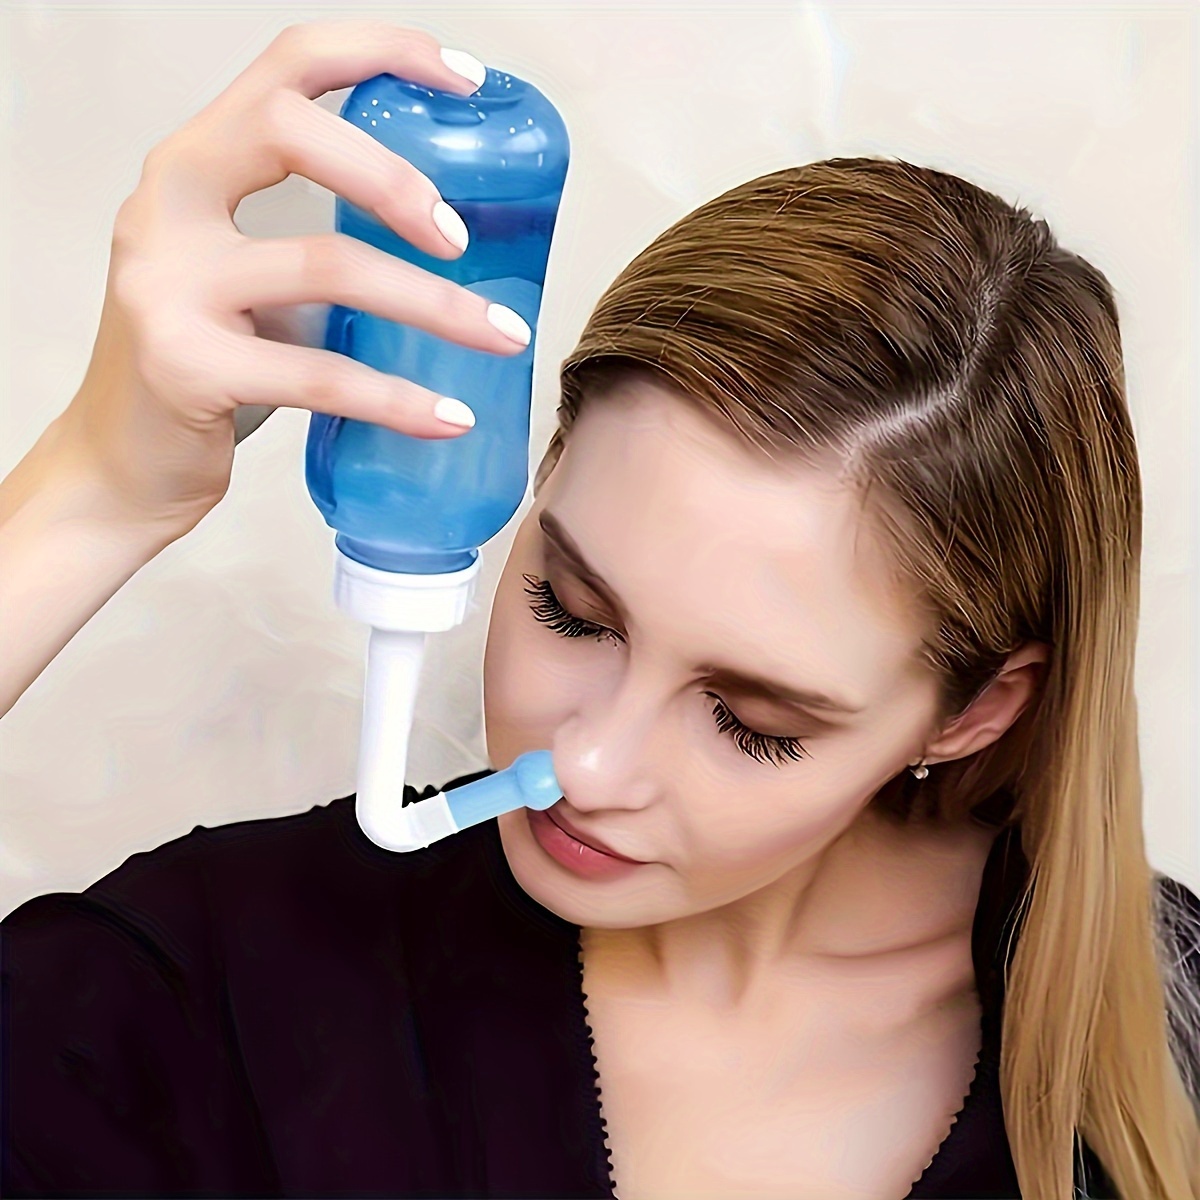 

Effective Nasal Rinse And Cleansing For Adults - Clear Sinuses And Relieve Congestion, Nasal Wash Bottle, Easy Squeeze Comfort Design, Leakproof Adult Nasal Irrigation